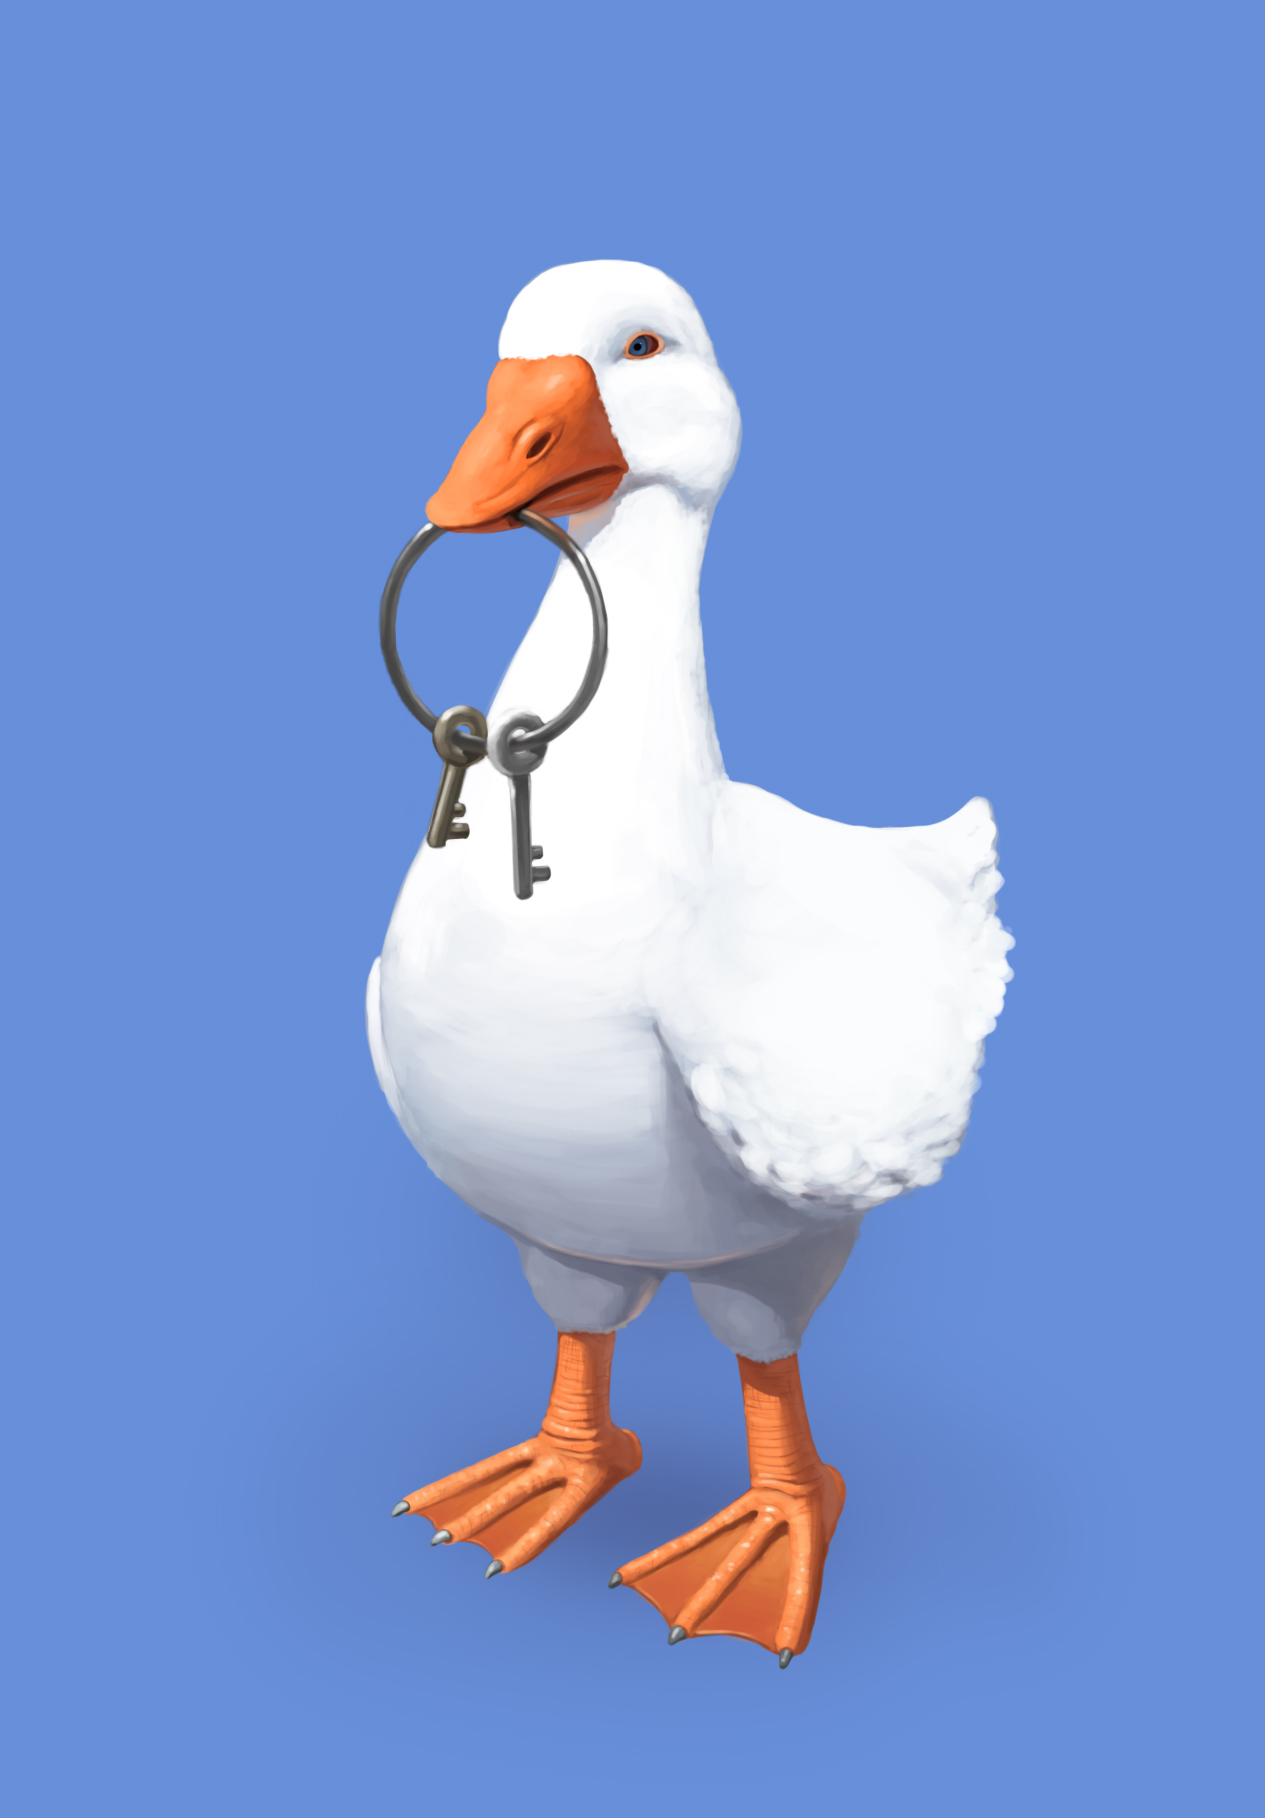 Honk! Untitled Goose Game has come to Fall Guys